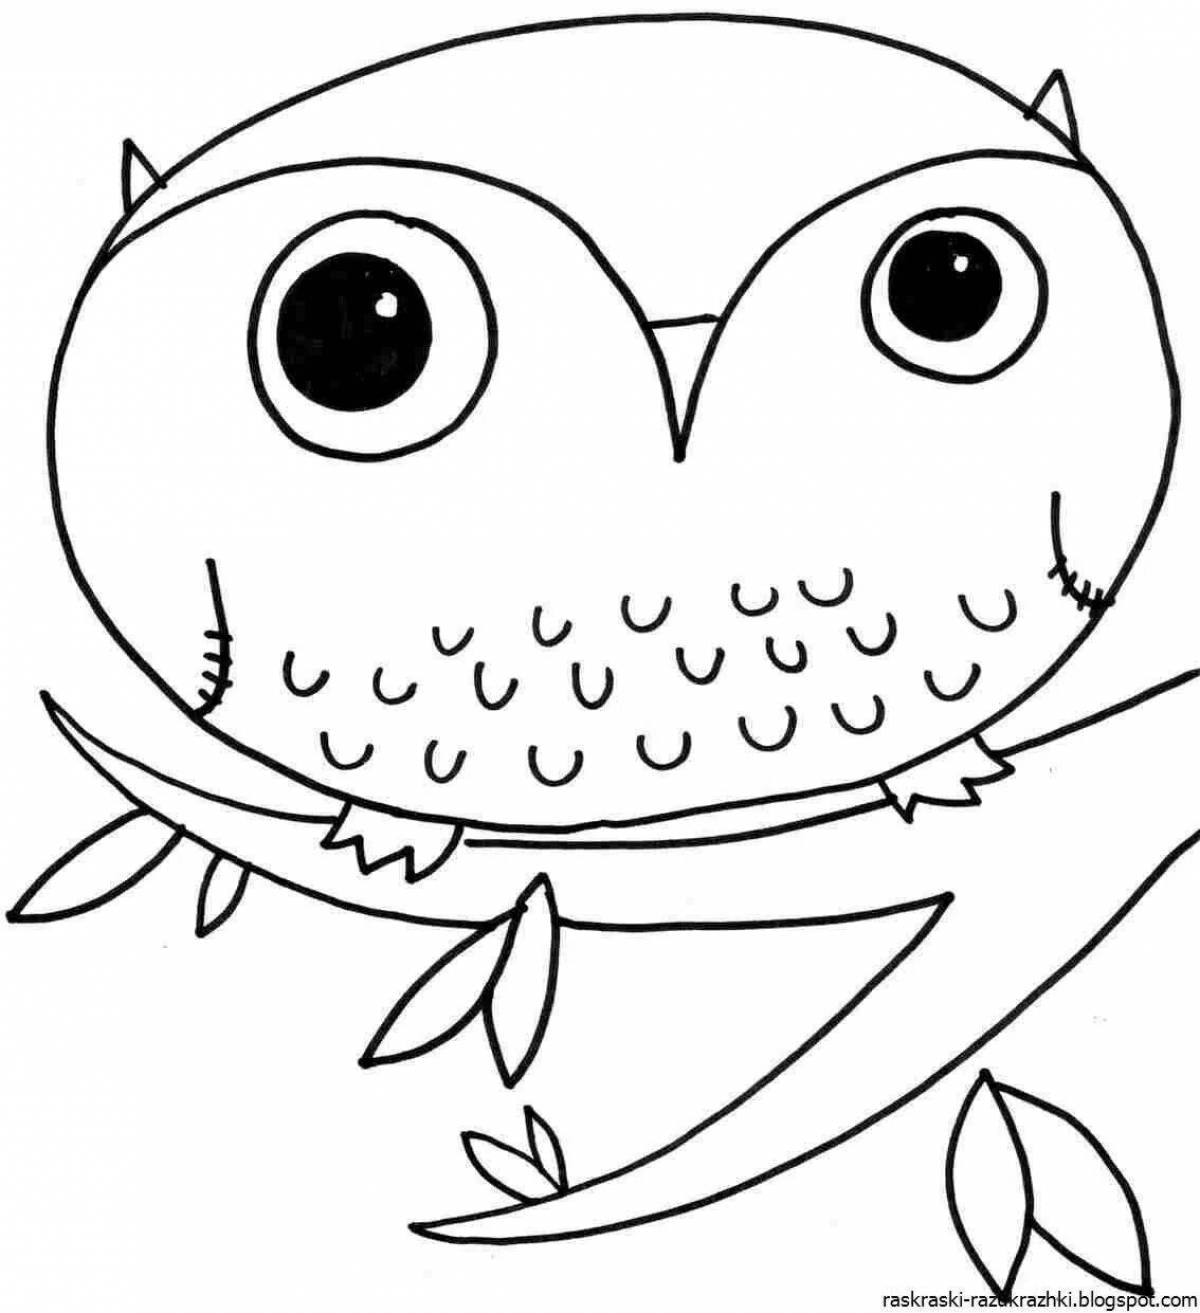 Colorful owlet coloring page for kids